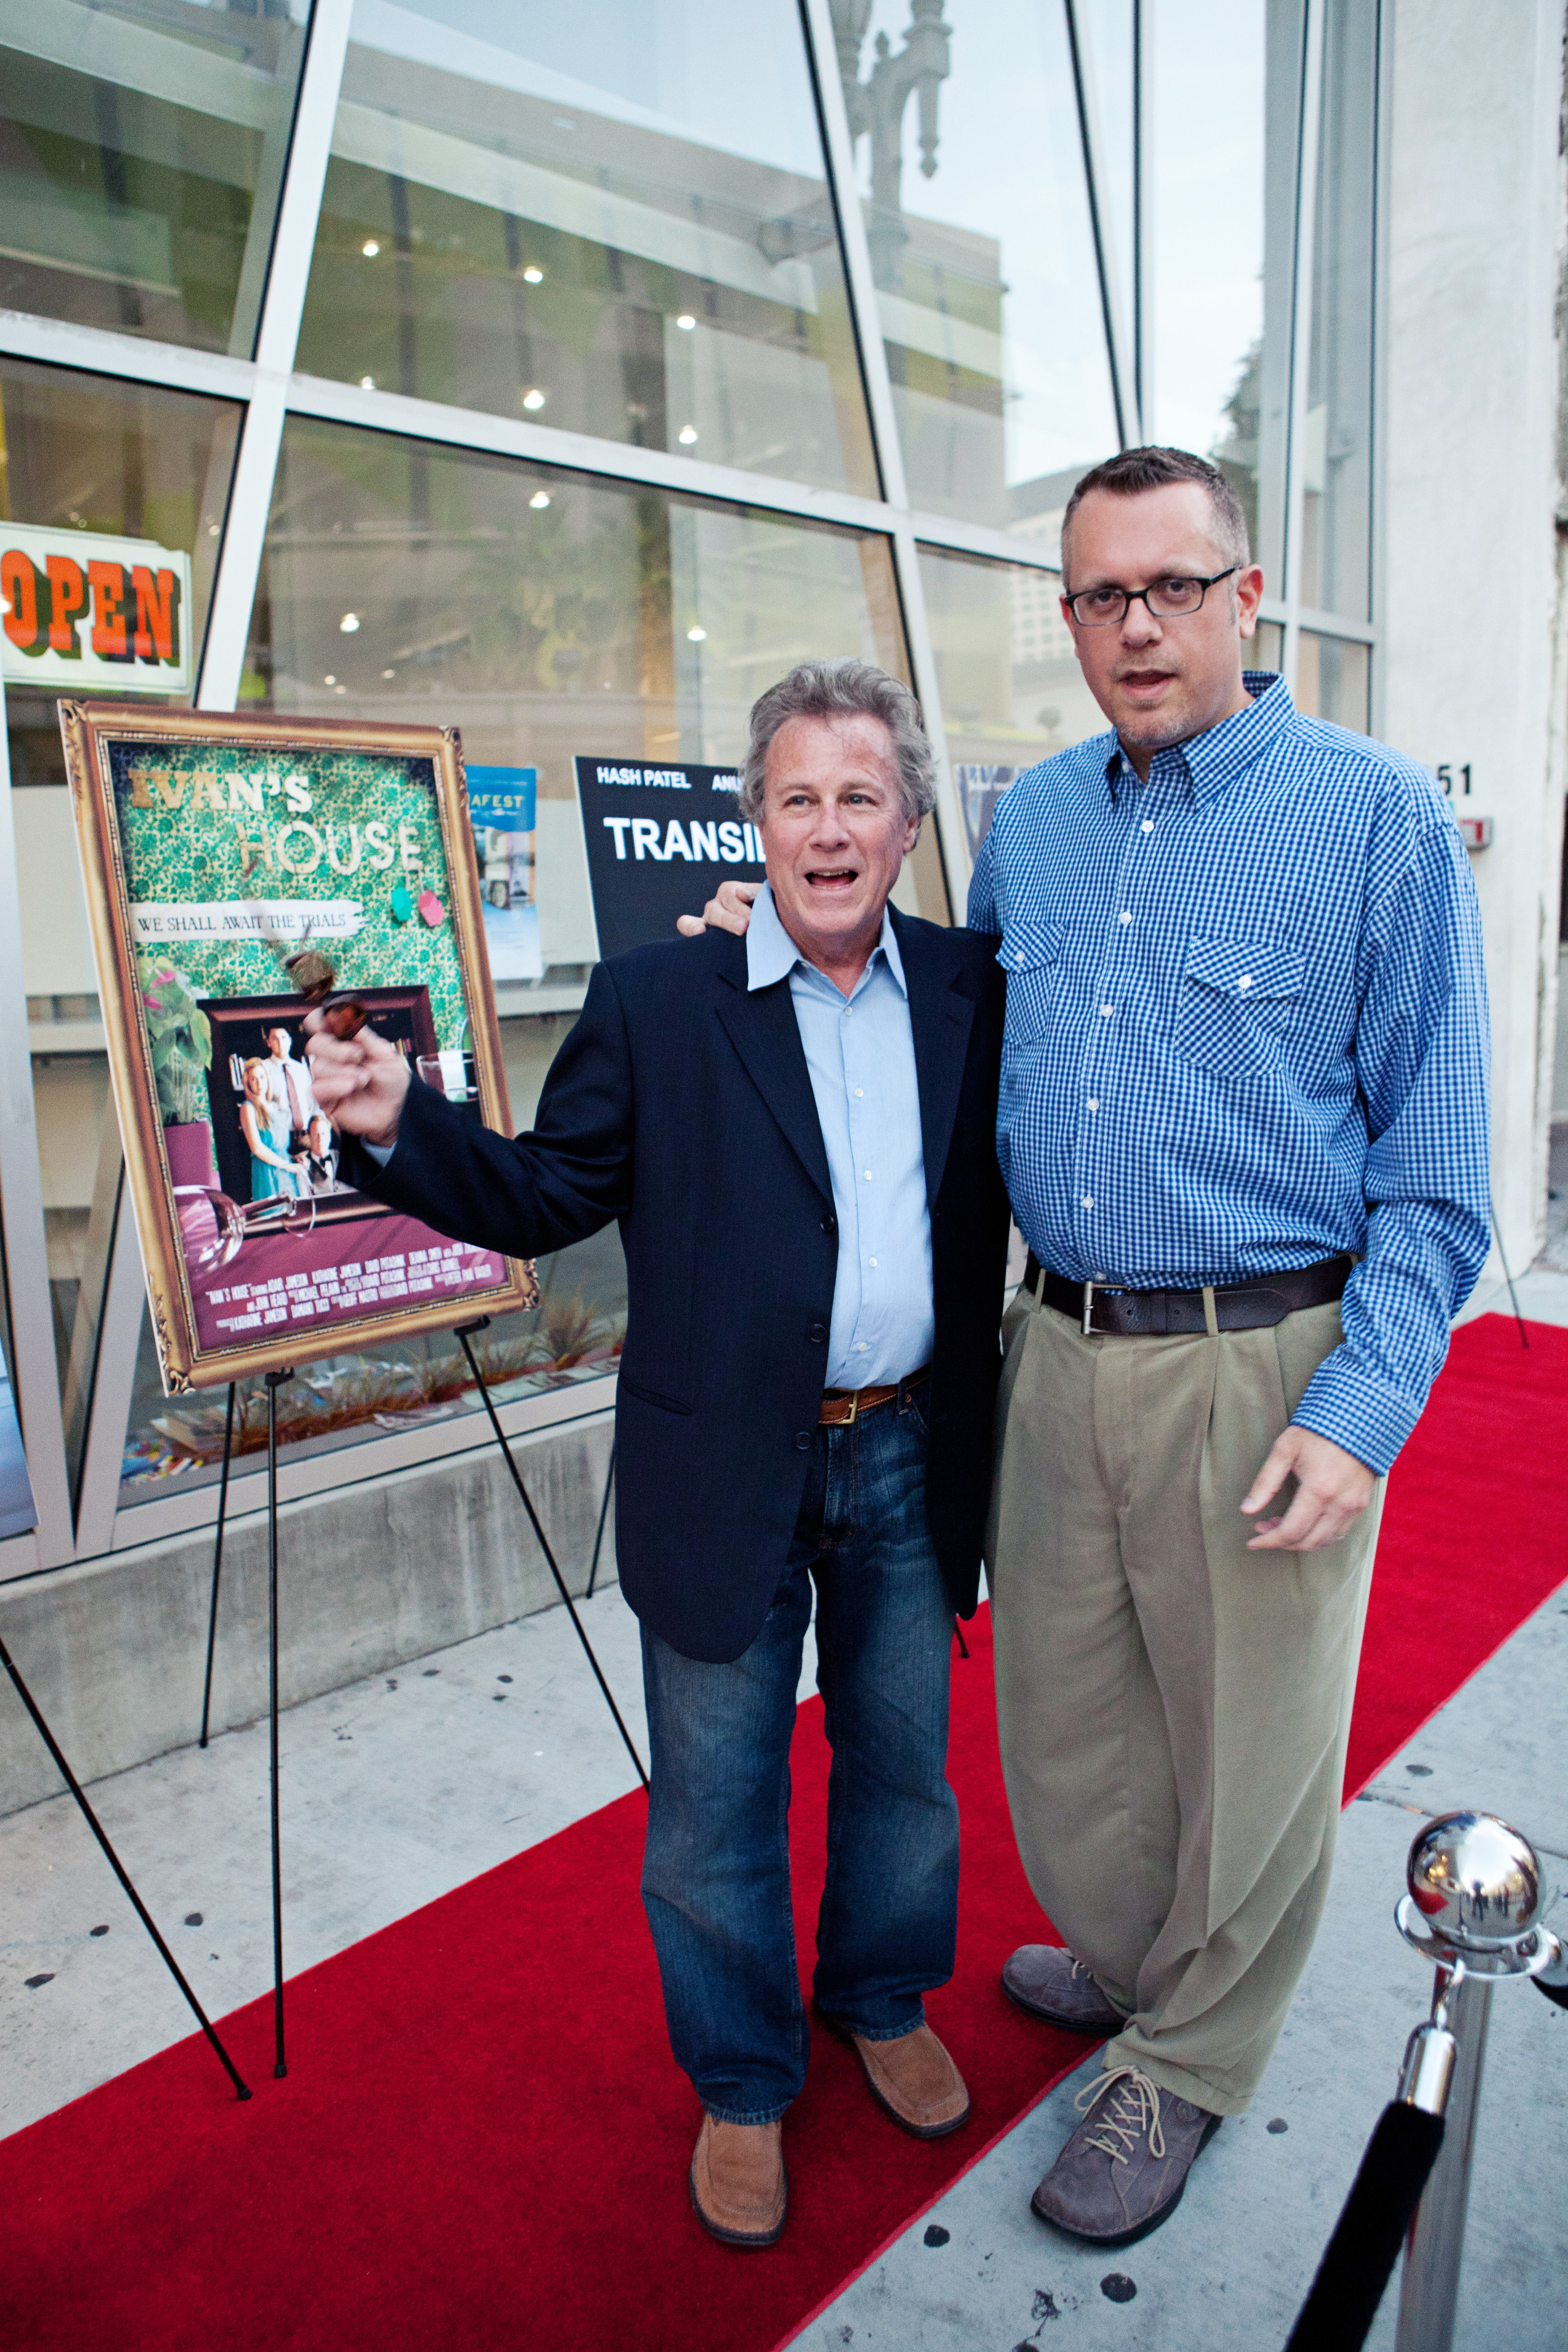 Peter Paul Basler and John Heard at event of ONE APRIL NIGHT OF SHORTS